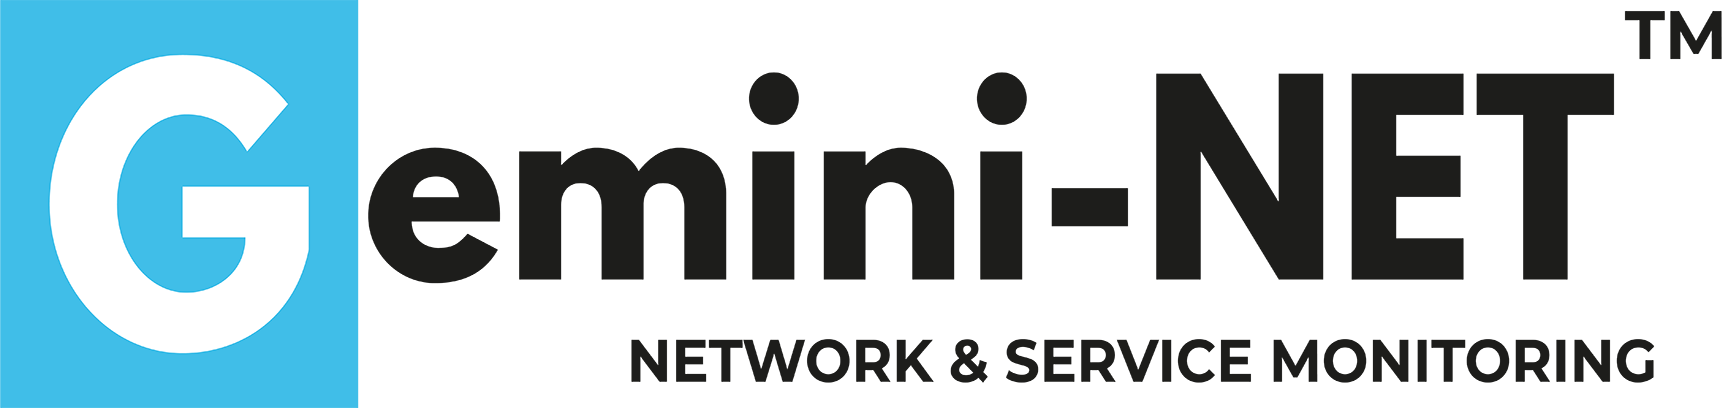 Gemini - Resi Informatica active and passive monitoring of networks and communication services